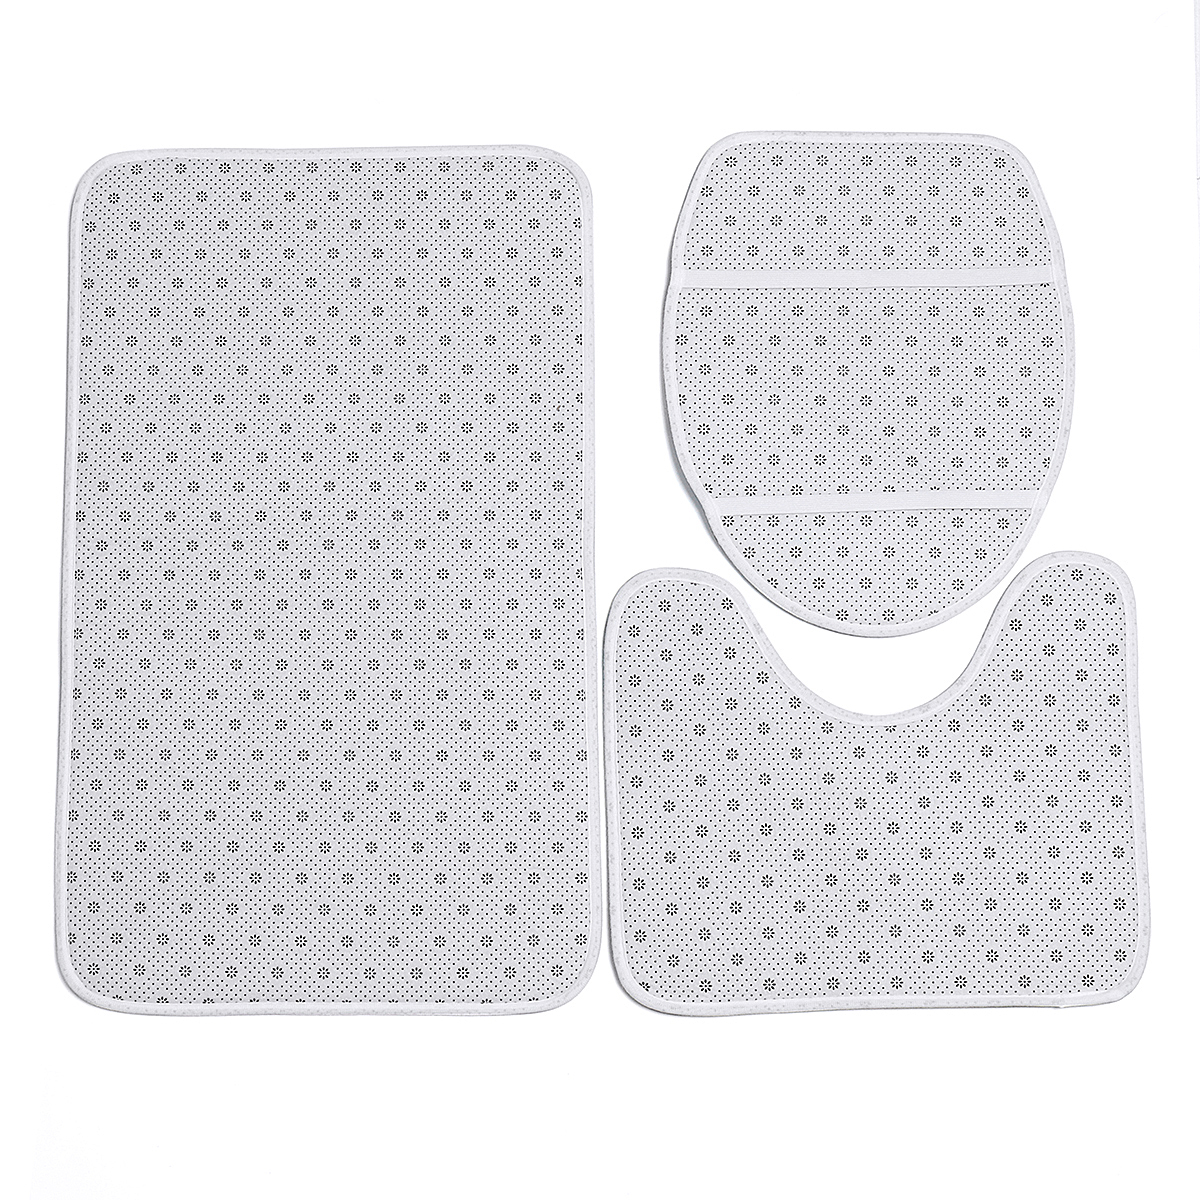 Toilet-Seat-Covers-Bathroom-Non-Slip-Thermometer-Fat-Cat-Pedestal-Rugs-Lid-Toilet-Covers-Bath-Mats-1411646-7